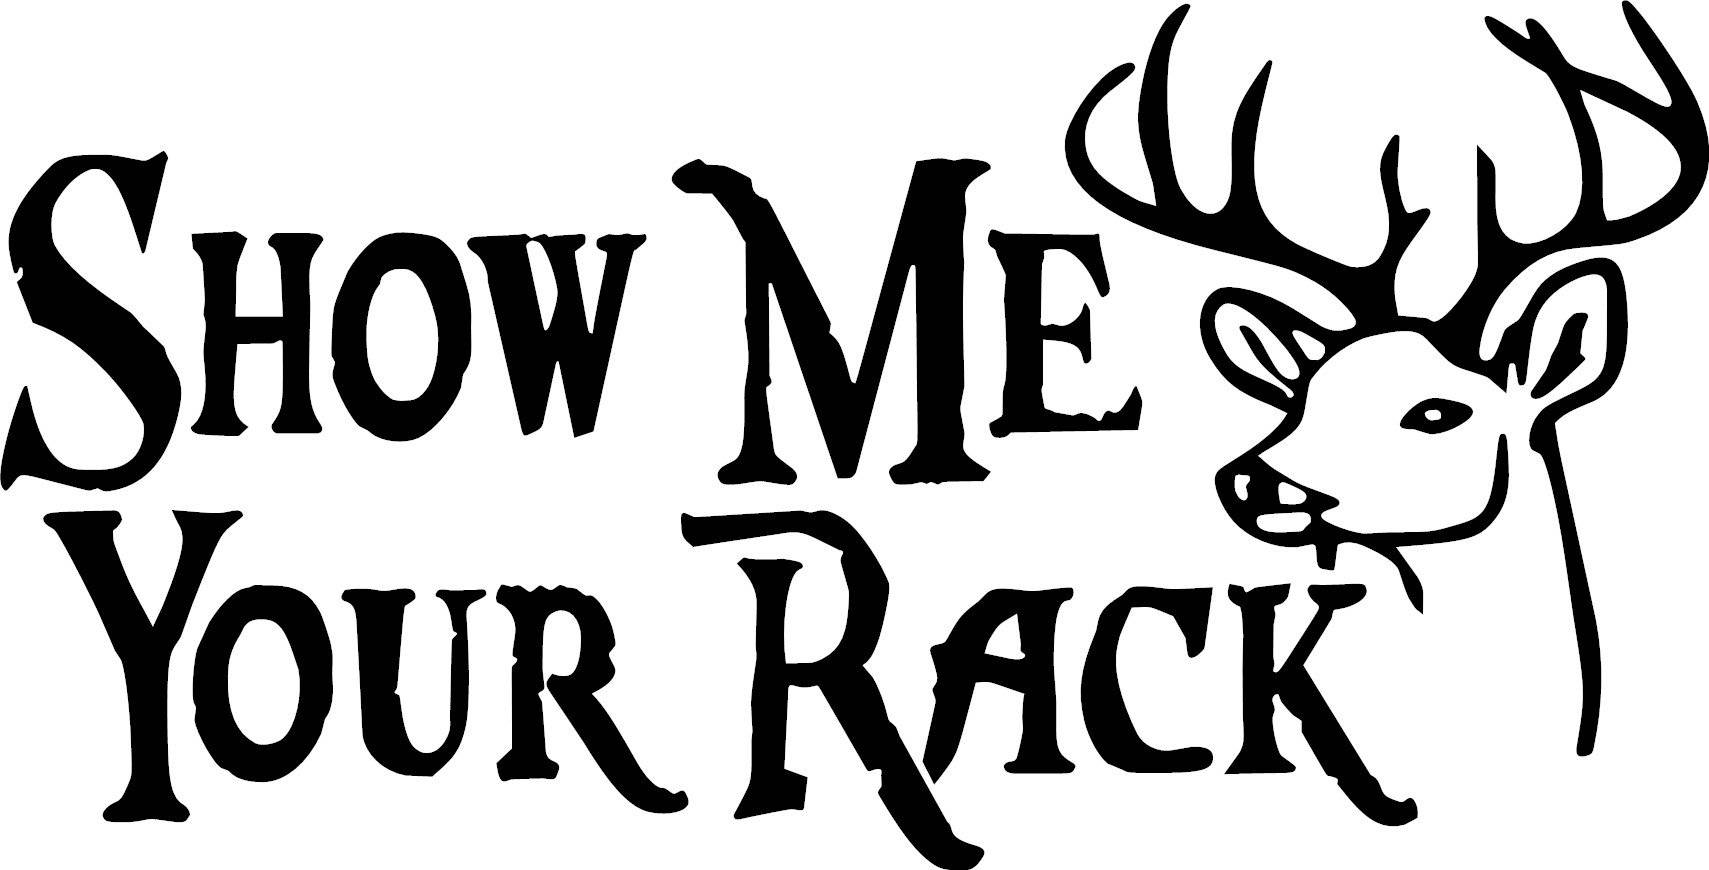 Show Me Your Rack Vinyl Window Sticker Decal - Deer 4wd Hunting Shooting | QIKAZZ 4x4 & Camping